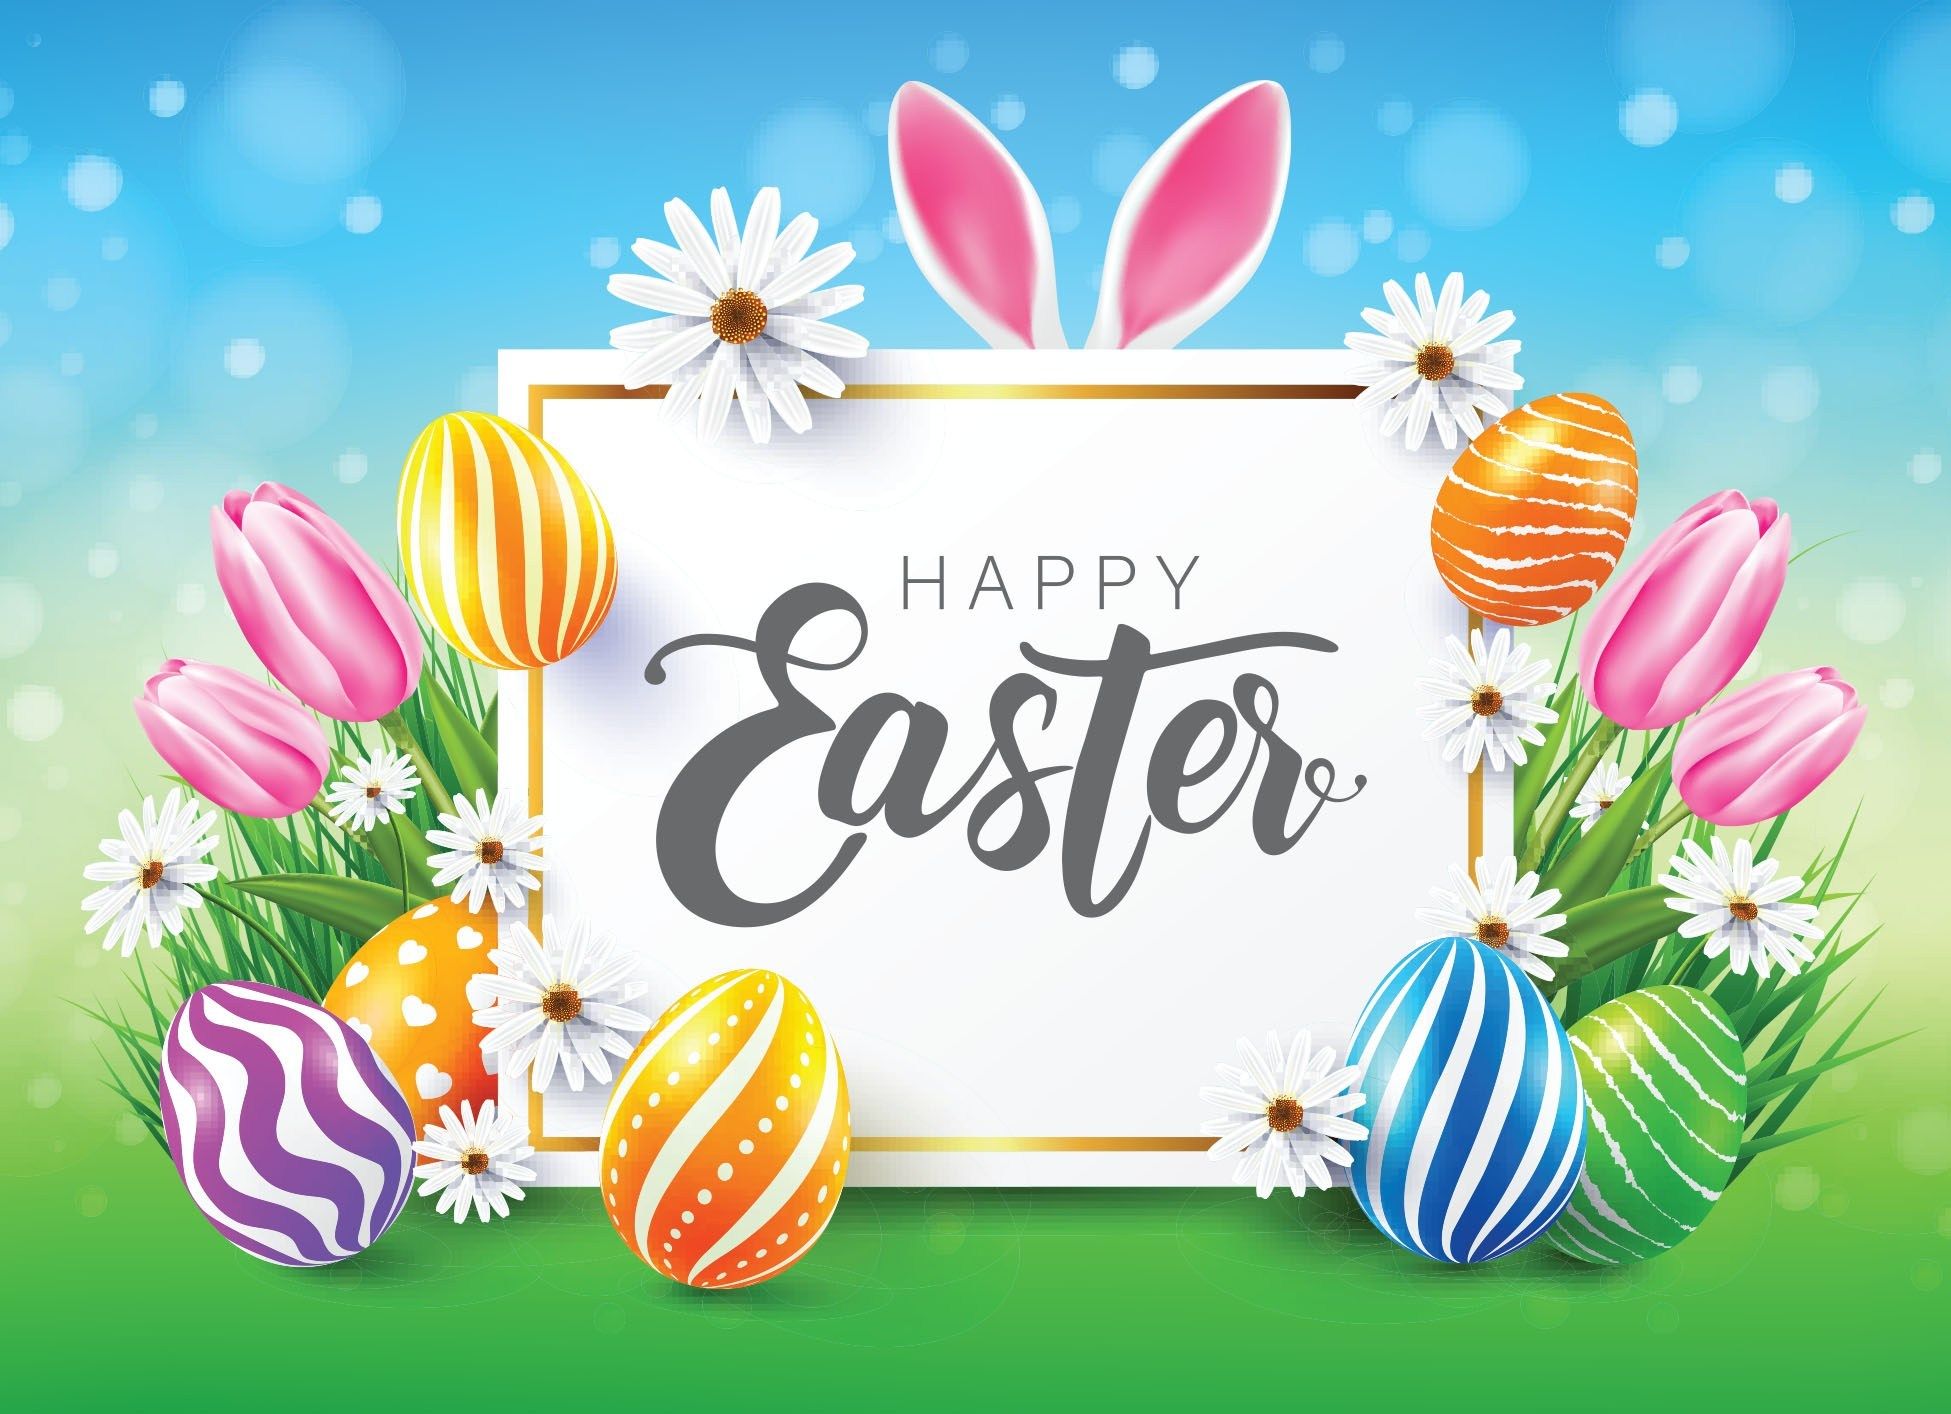 Happy Easter 2020 HD Wallpapers Wallpaper Cave